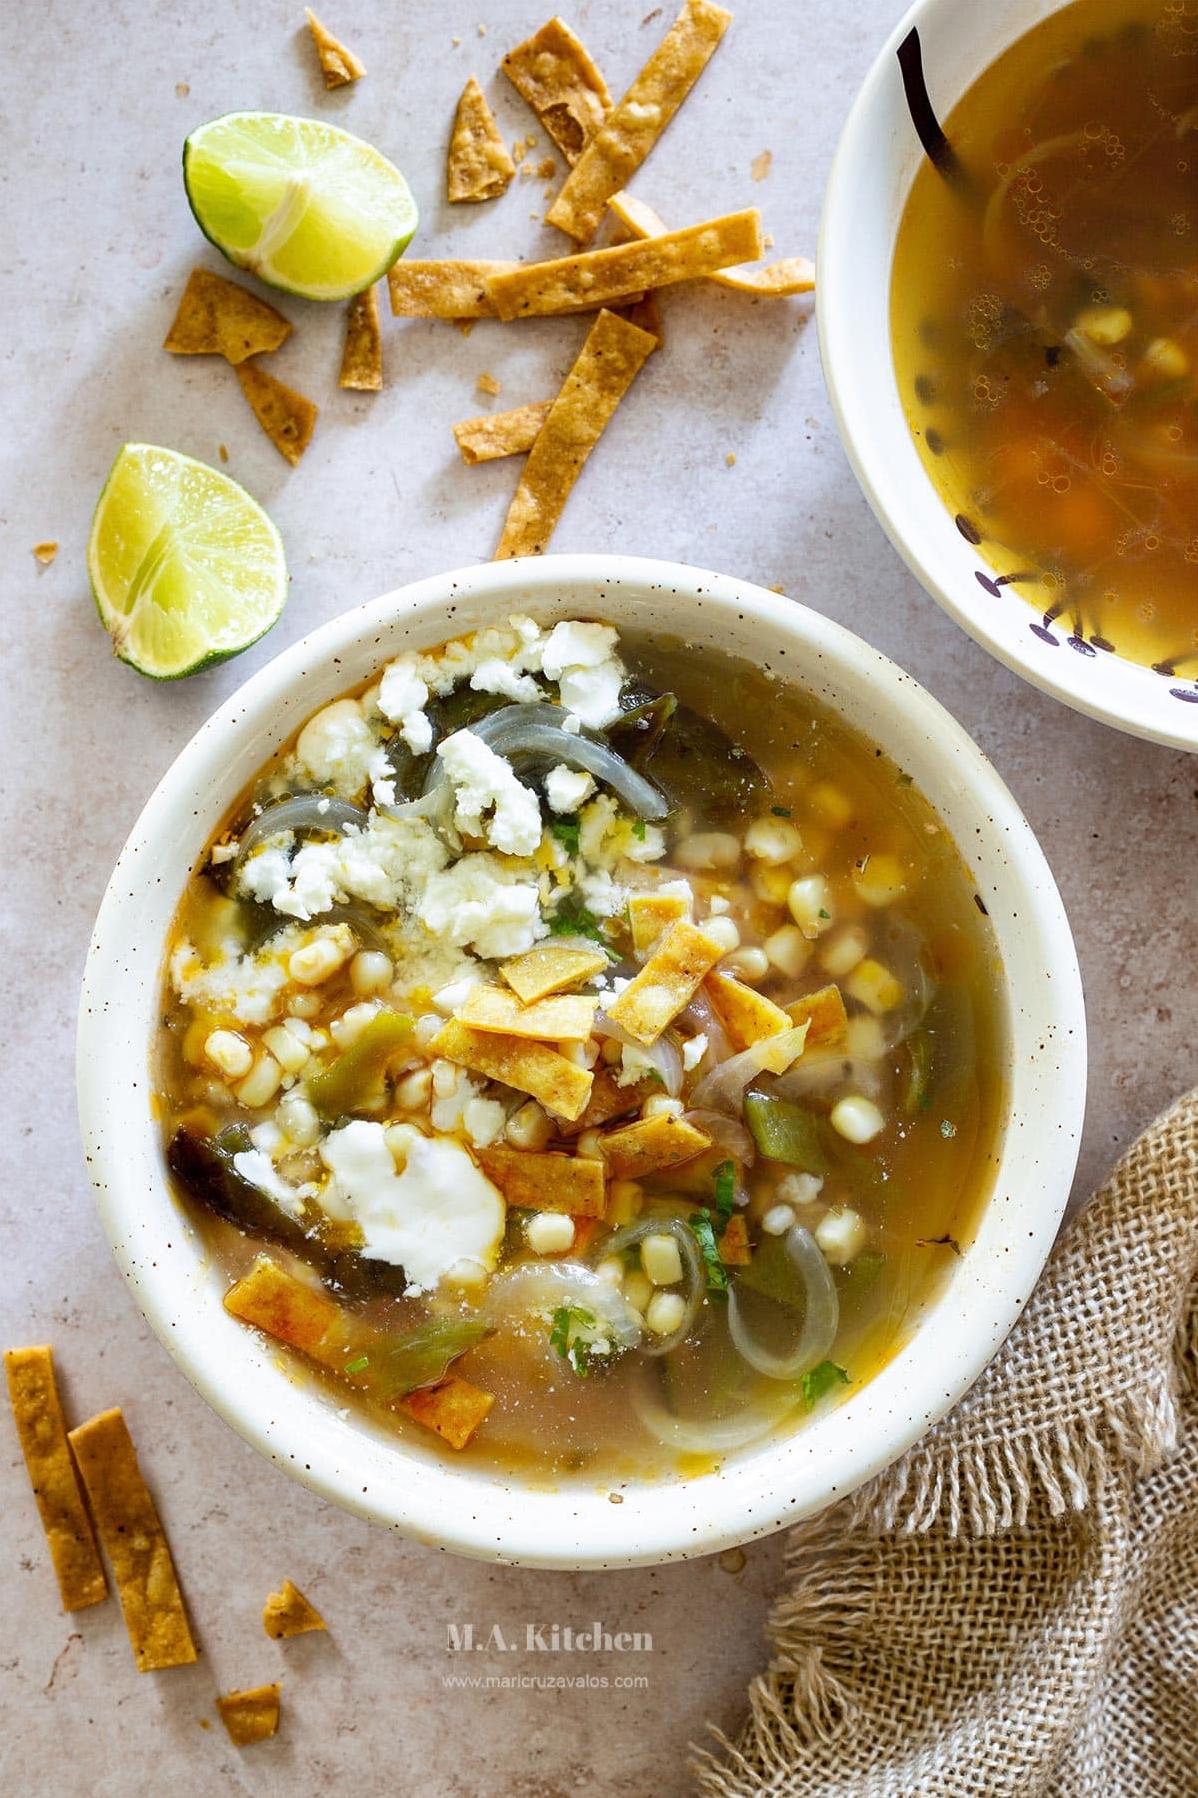  This Mexican corn soup is the perfect way to use up your summer corn harvest